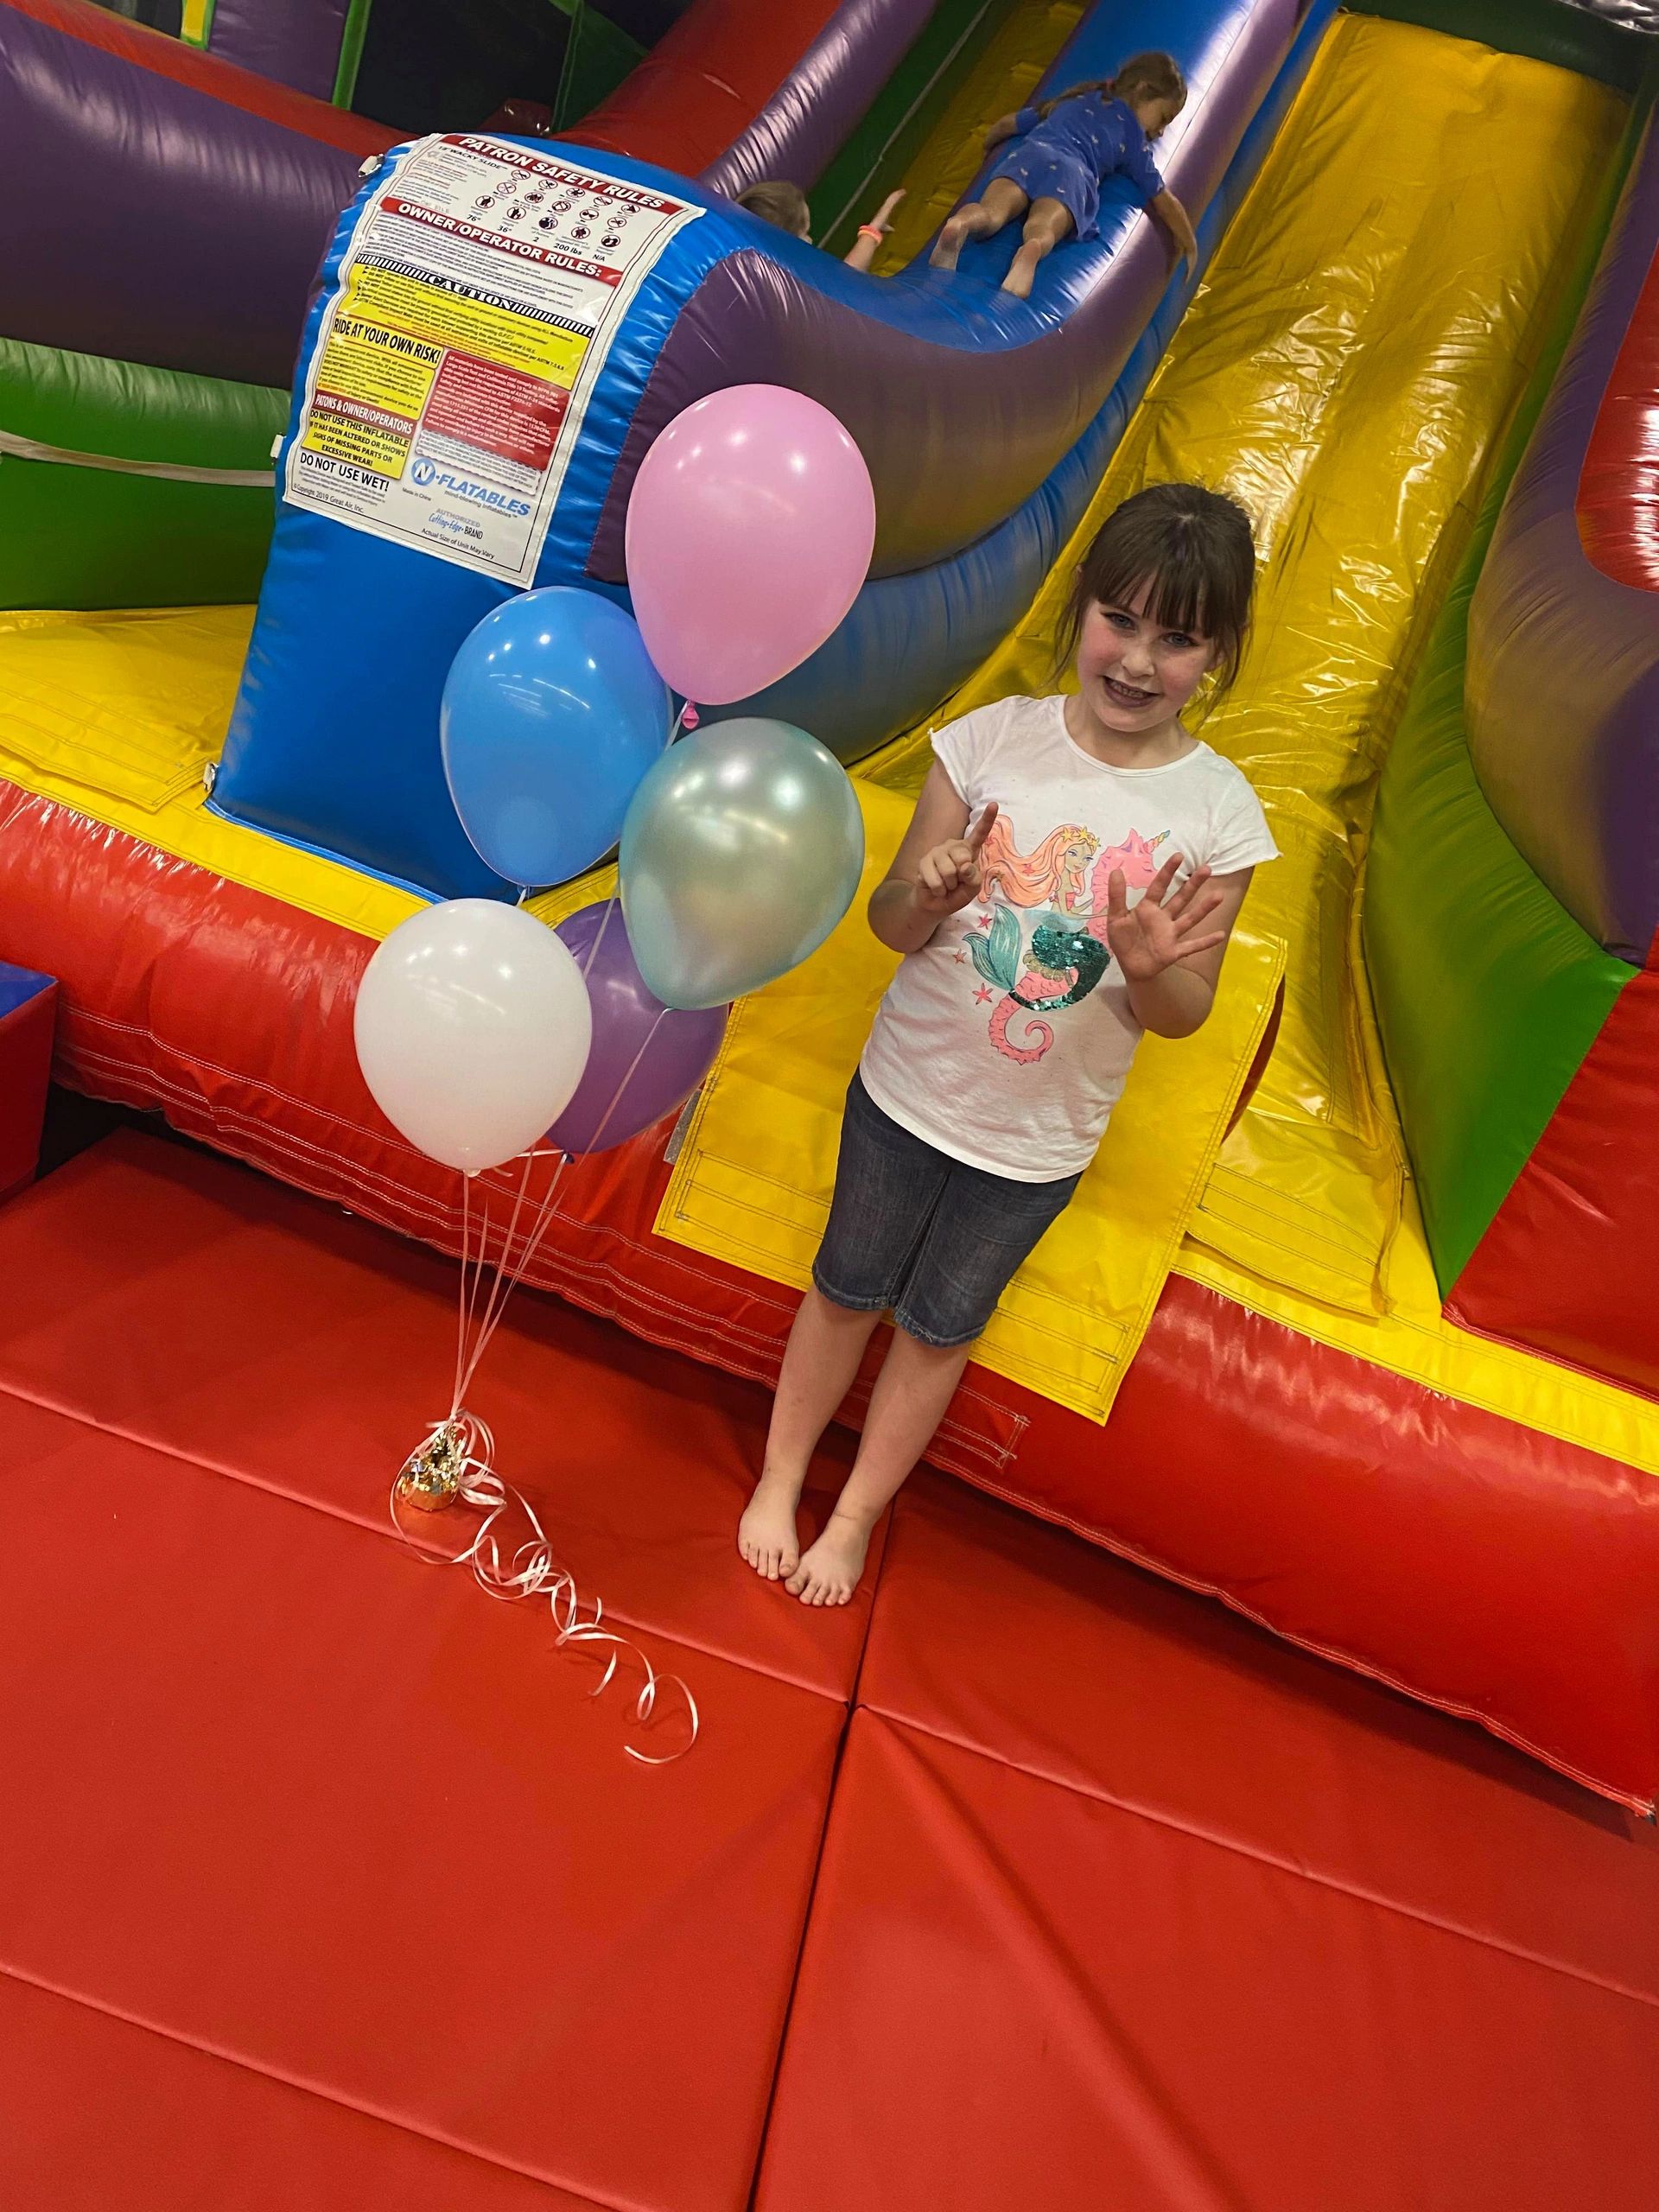 Kids Birthday Party Place, Indoor Bounce House